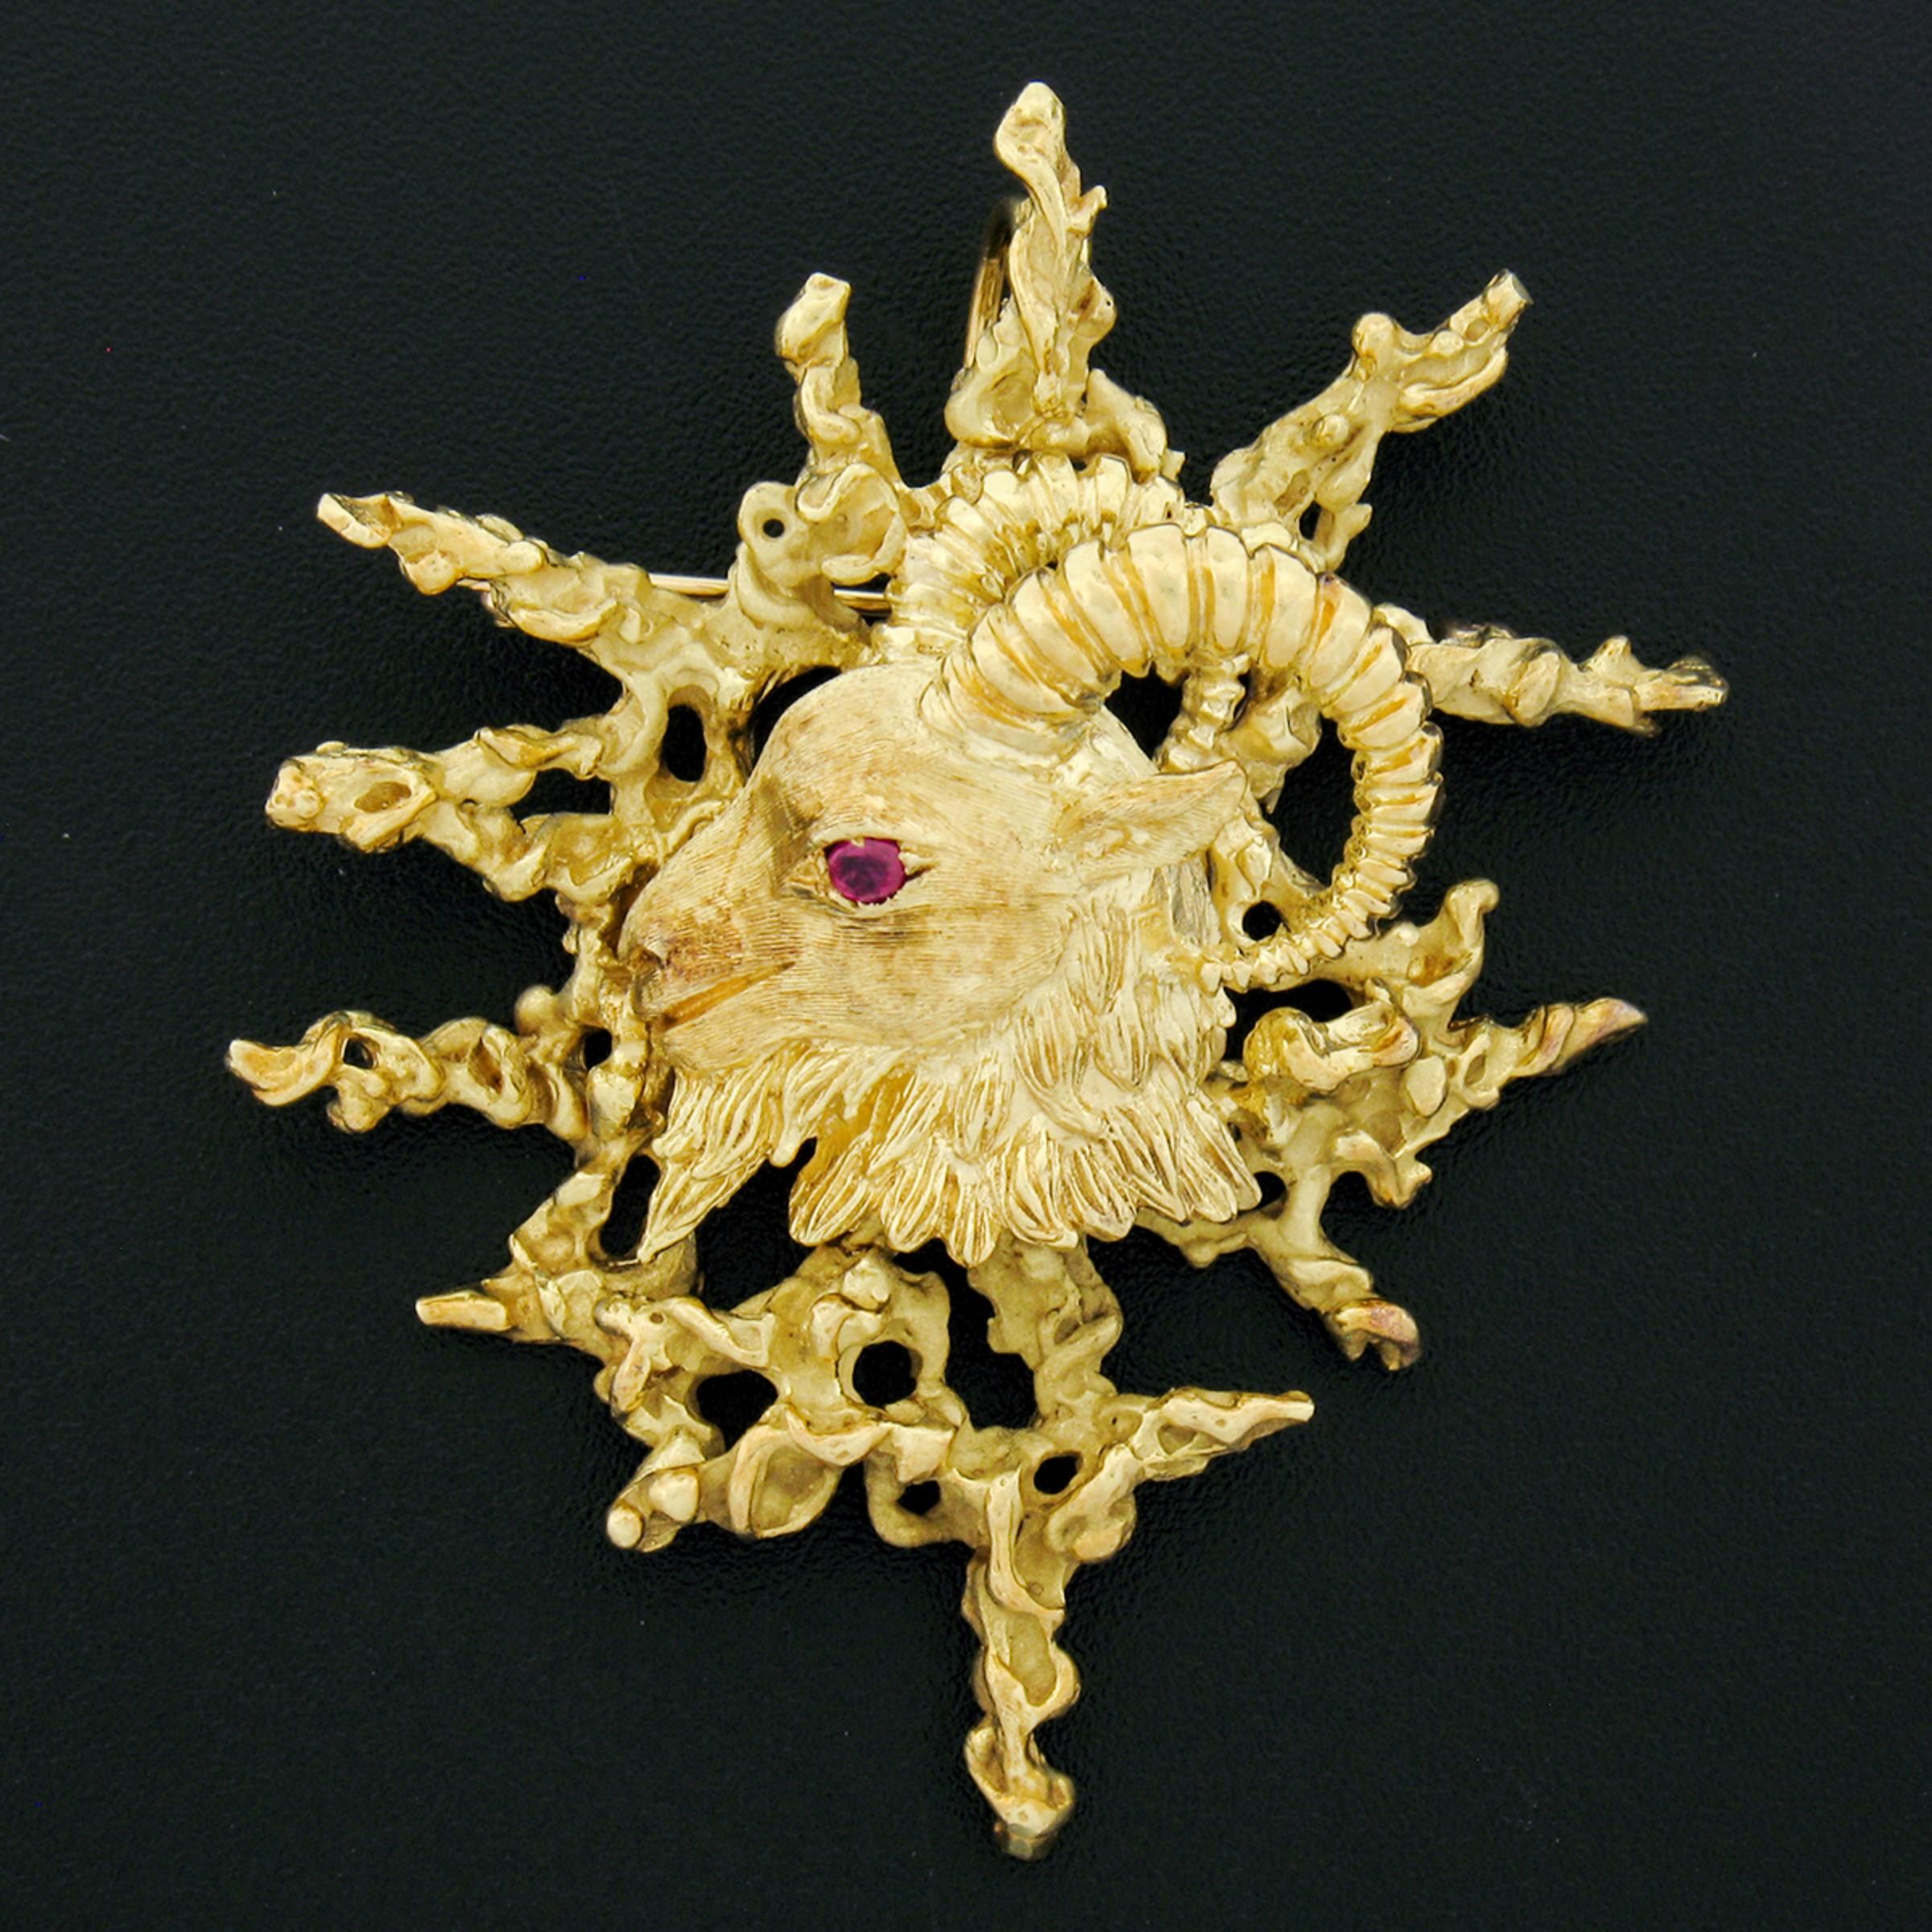 Here we have a magnificent, vintage, Kurt Wayne pin/brooch or pendant that was crafted in 1969 from solid 18k yellow gold. This substantial piece features an incredibly detailed design with a ram at its center in which has a fine ruby neatly set at